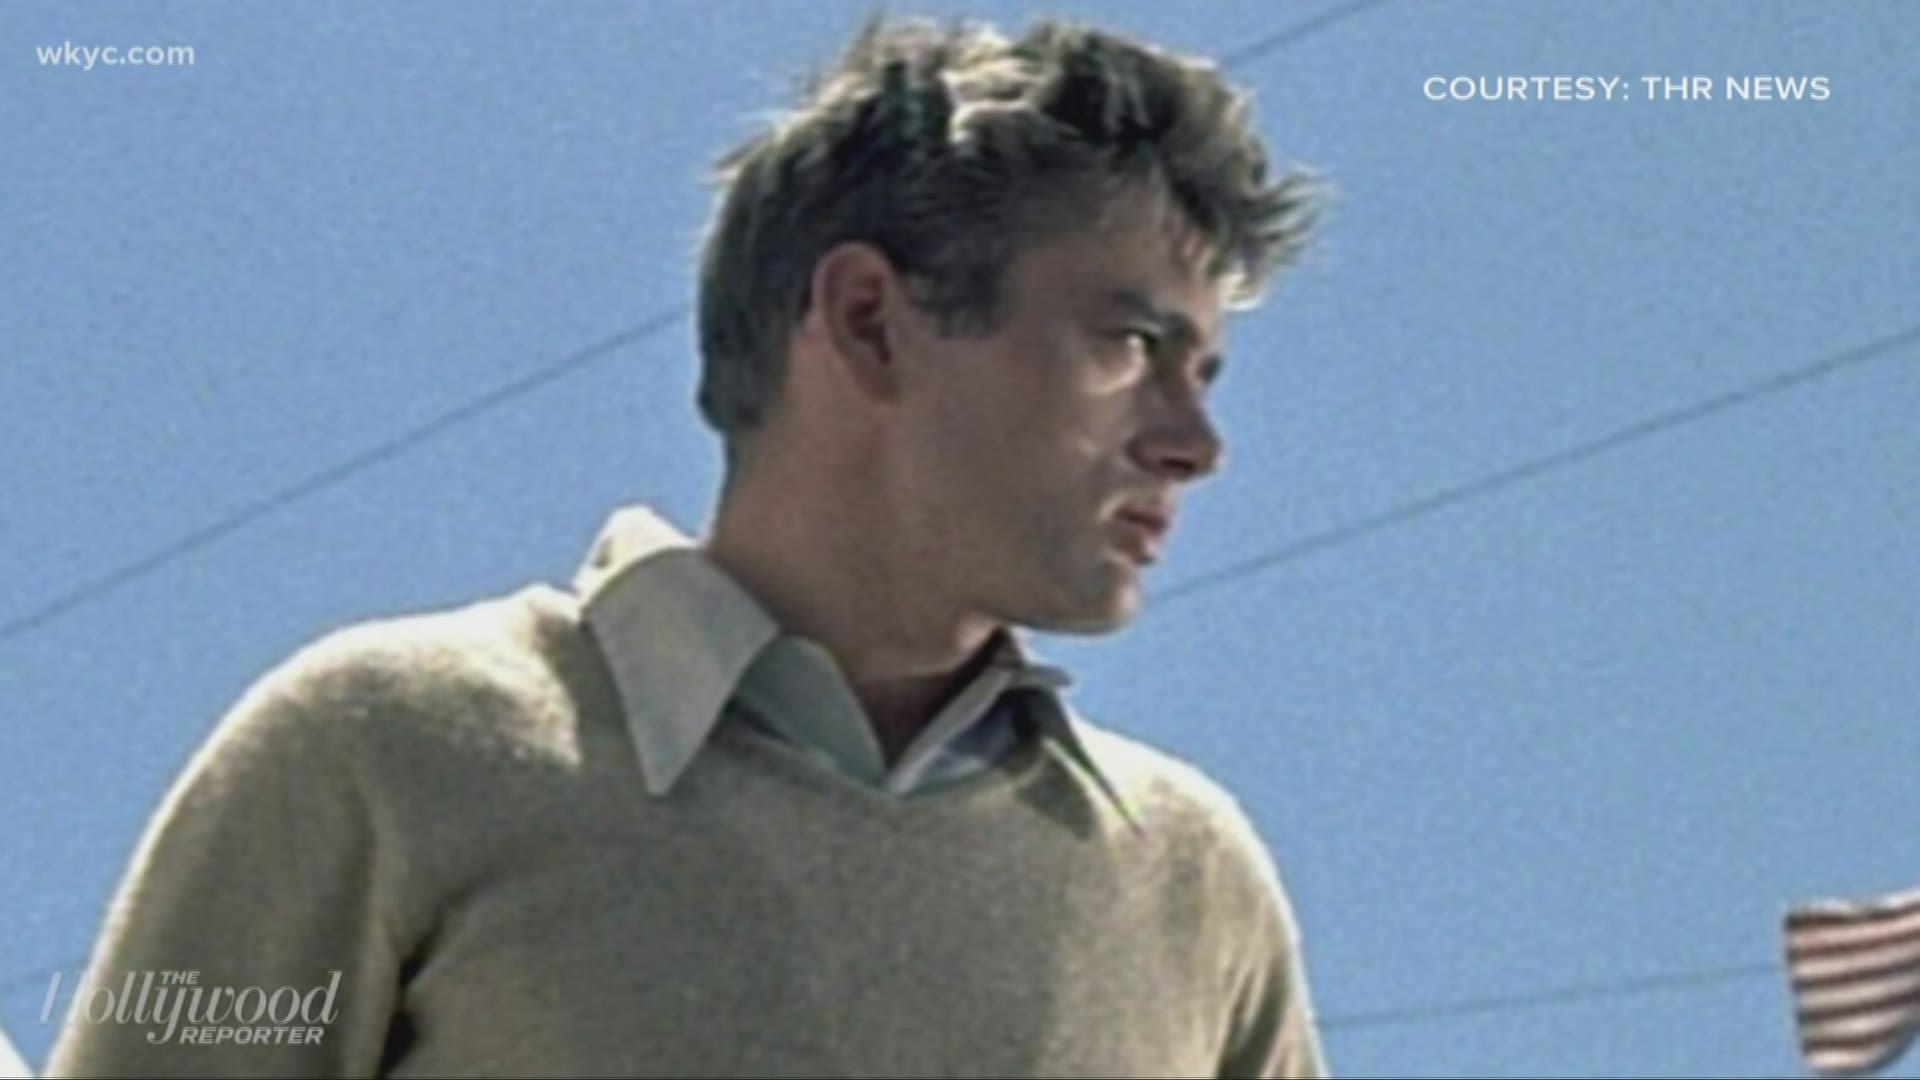 64 years after he died, the iconic actor James Dean is returning to the big screen. Dean will be seen virtually in an upcoming Vietnam War film.